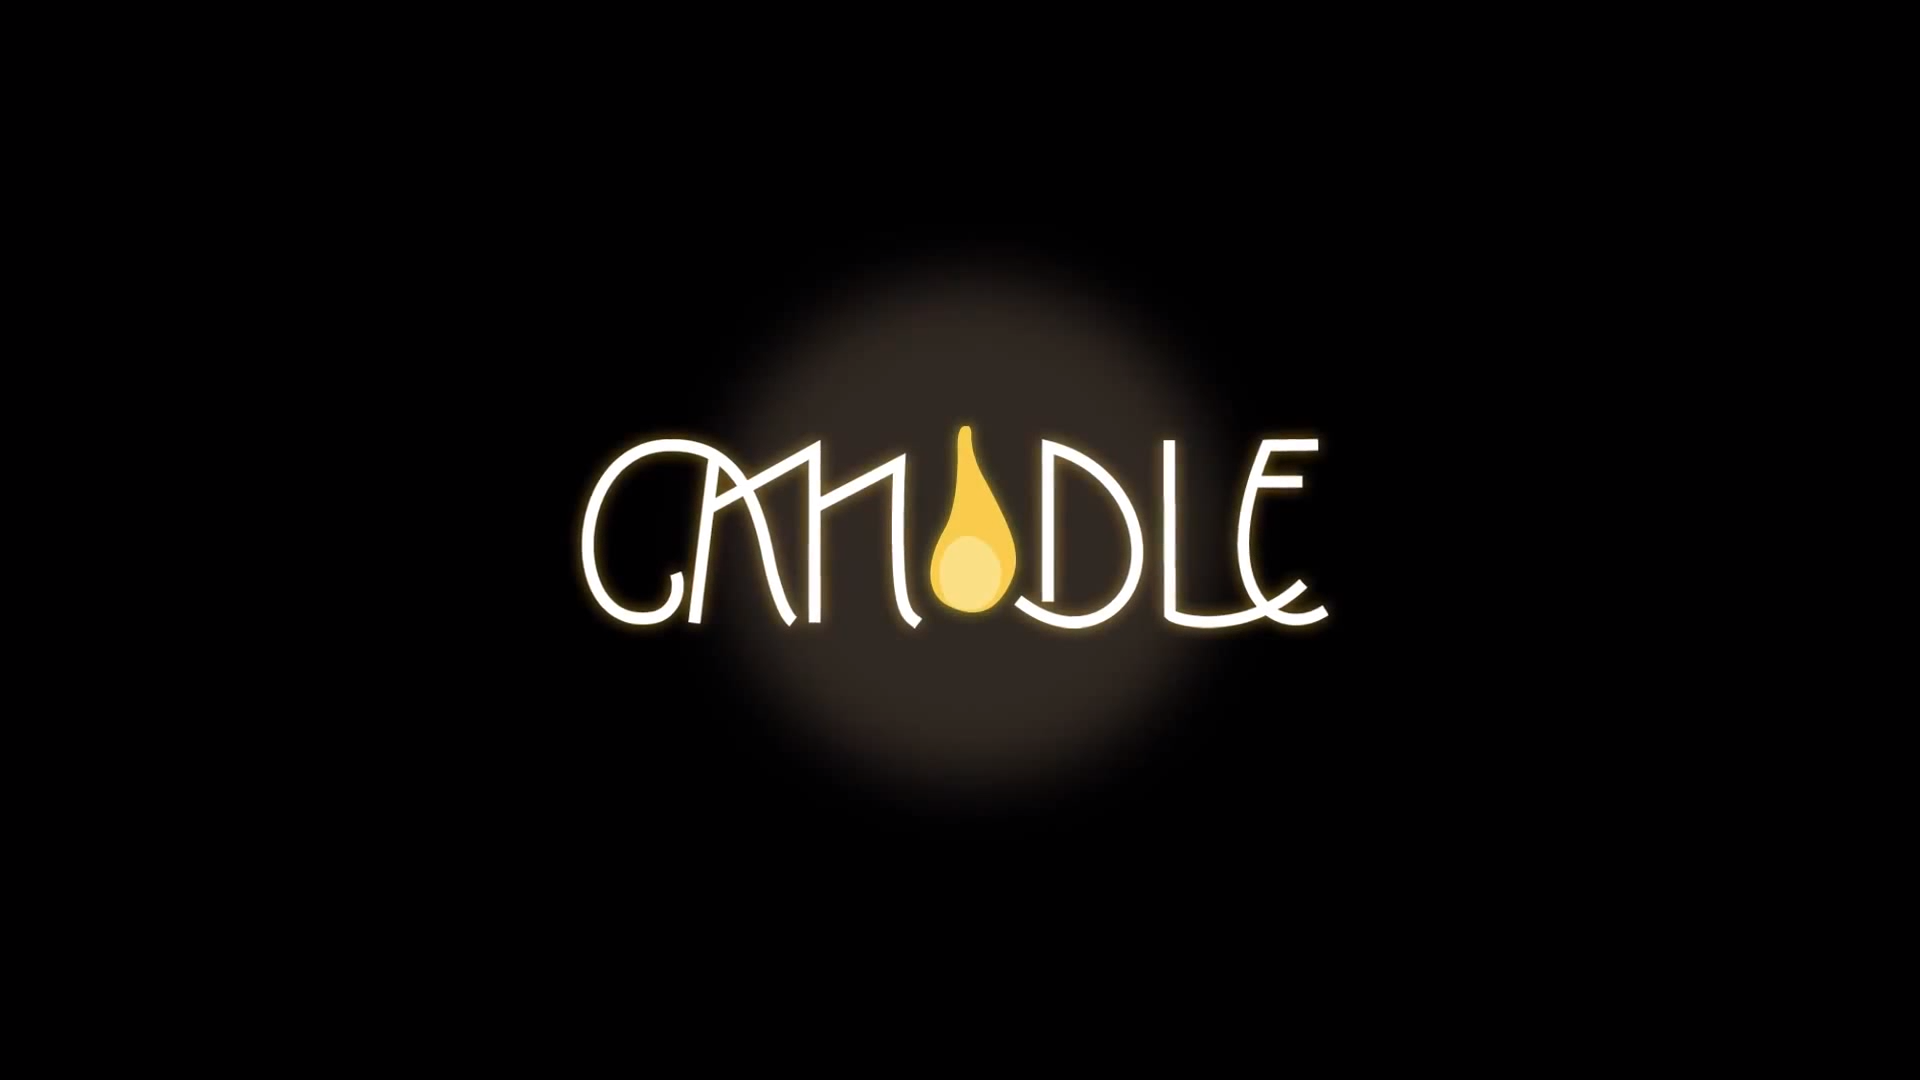 ‘Candle’ Will Release On Wii U Even If Stretch Goal Isn’t Reached